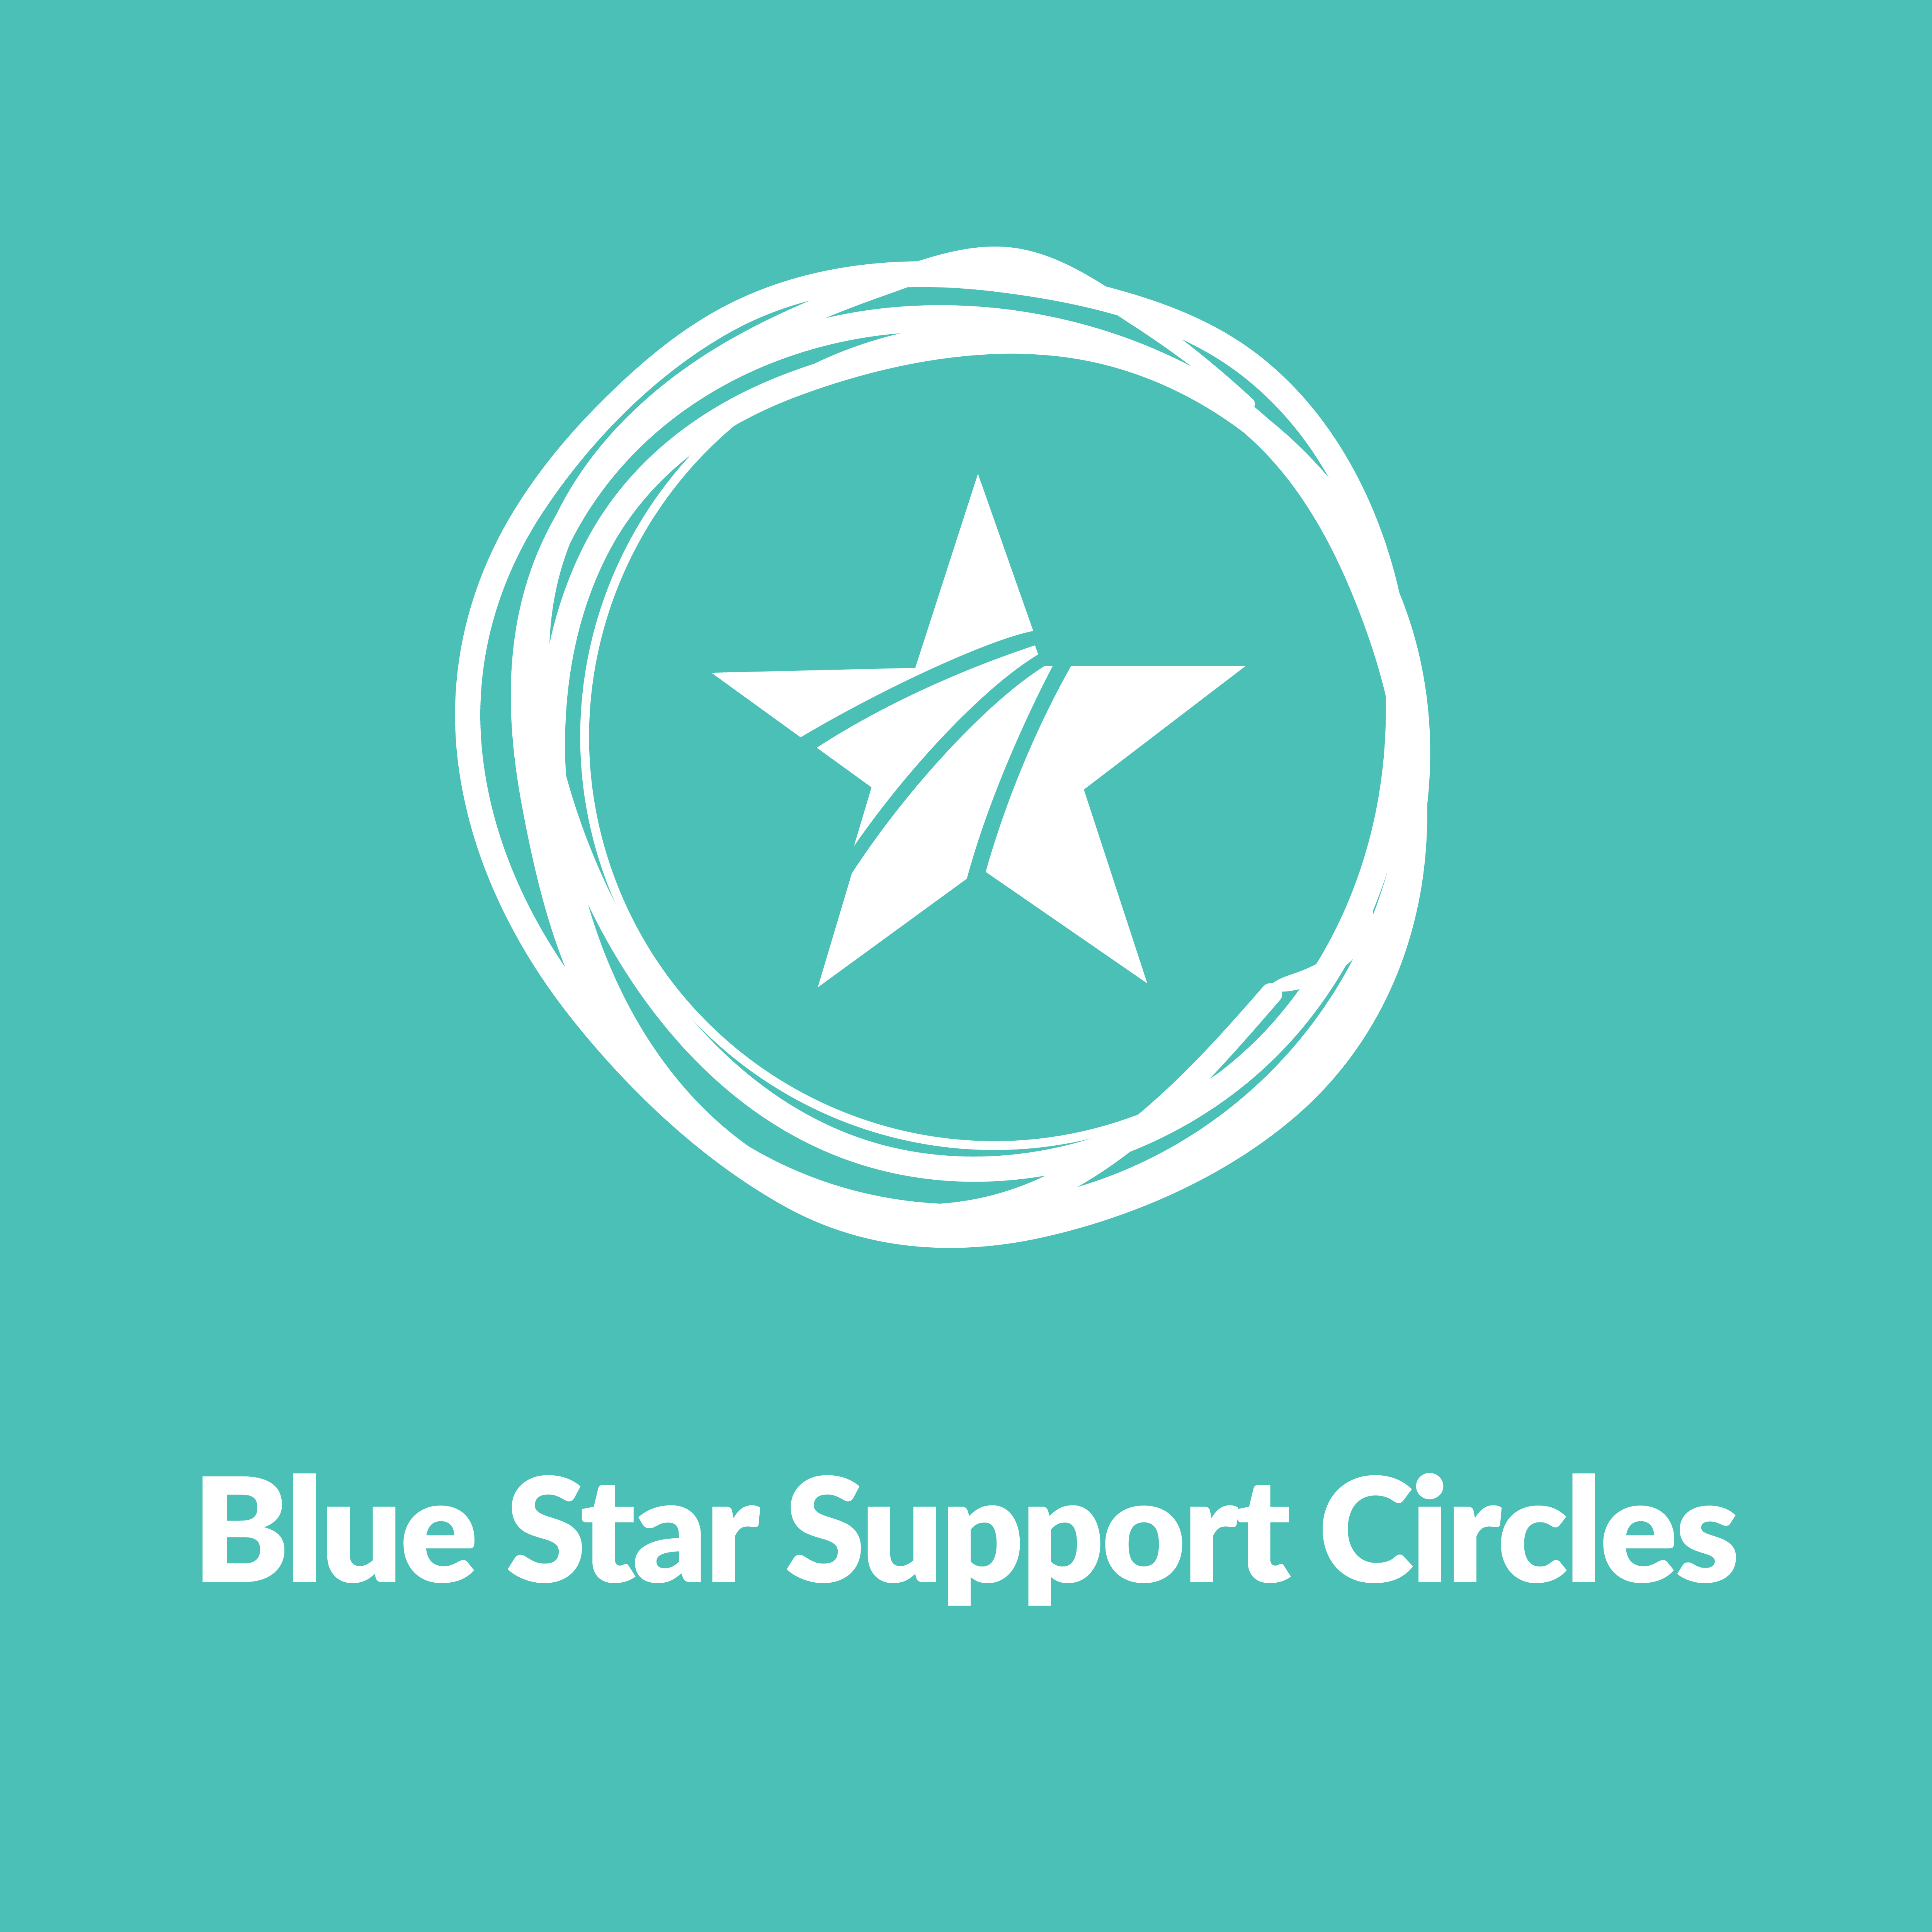 BSF_SupportCircles_1200x1200_Toolkit_Tiles2